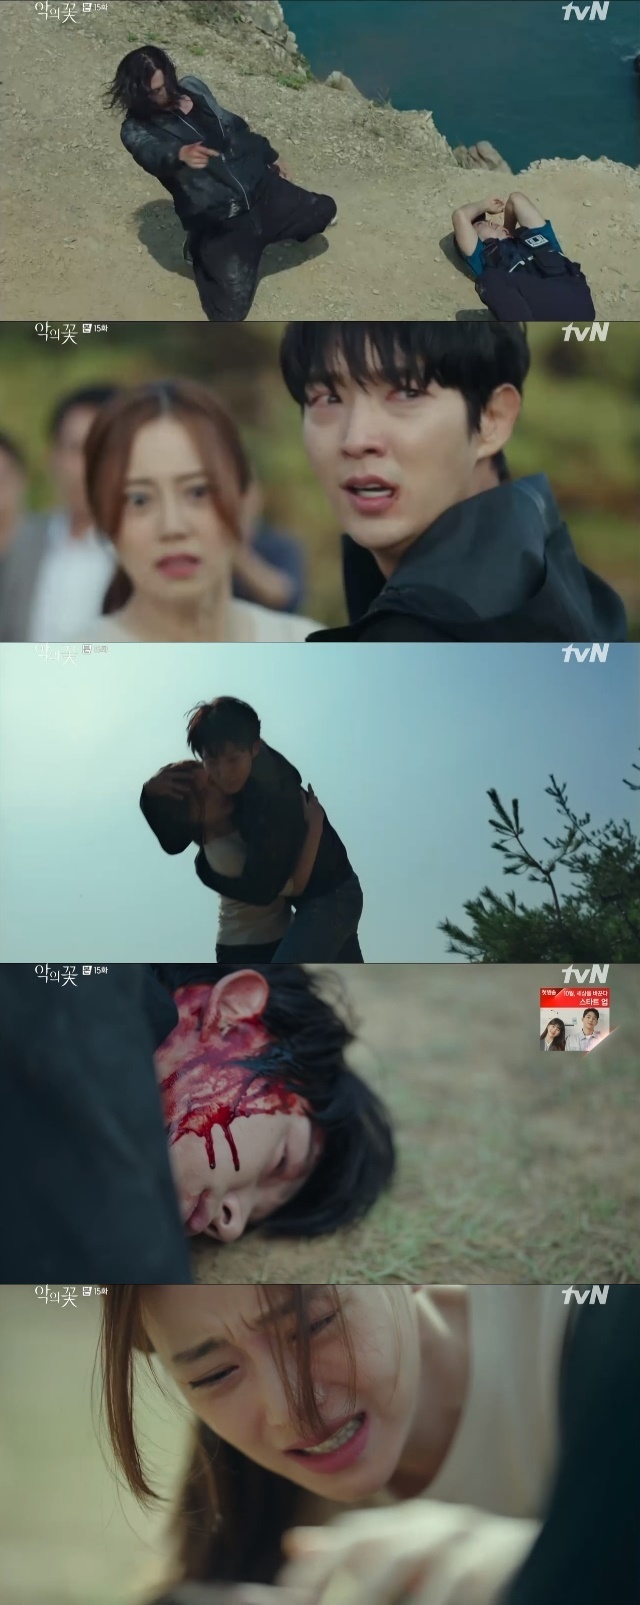 Lee Joon-gi was shot instead to defend Moon Chae-wonIn another ordeal, can these two people meet Happy Endings in the remaining one time?In the 15th episode of TVNs Drama Flower of Evil (playplayed by Yoo Jung-hee/directed by Kim Cheol-gyu), which was broadcast on September 17, Do Hyun-soo (Lee Joon-gi), who caught Baek Hee-Seong (played by Kim Ji-hoon), was portrayed as the last waterway decorated by Jeong Mi-sook (played by Han Soo-yeon).On this day, Baek Hee-seong traded with Yeom Sang-cheol (Kim Ki-moo) for the only survivor of the serial murder case, Han Soo-yeon.Baek Hee-seong, who handed over 500 million to Yeom Sang-cheol and handed over Jung Mi-sooks personal affairs, predicted the murder, saying, This is your destiny.But the lock of the cage where Jung Mi-sook is trapped was not opened because Do Hyun-soo, who had previously held hands with Yeom Sang-cheol, changed it to another lock in advance.The only key to opening the lock was also in Jung Mi Sooks hand.Do Hyun-soo hit Baek Hee-seong, who was excited because he could not kill Jung Mi-sook in front of him. And Do Hyun-soo said, Hi, did you wonder who I was?I saw the Baek Hee-seong who gave a greeting that did not fit the situation and I figured out what process I was framed.Baek Hee-seong was stuck and relaxed.Baek Hee-seong deliberately showed Do Hyun-soo the official ID of Cha JiWon (Moon Chae-won), which he had taken, and suggested that he had killed Cha JiWon.Do Hyun-soo did not believe Baek Hee-seongs words and made a phone call to the police station, but he thought that Cha JiWon was dead because of Cha JiWon, who was disguised for safety.Baek Hee-seong provoked Do Hyun-soo to kill him, so he picked up a knife on the floor and told Jung Mi-sook, Please report to the police. Do Hyun-soo killed a man.He cut his hands and feet alive and crushed so that his shape could not be known. He killed and killed a living crawler several times. In this anger of Do Hyun-soo, Baek Hee-seong felt the fear that he had never felt before and began to run away with his spare time.After that, they chased and chased the mountain, and Do Hyun-soo caught Baek Hee-seong and stabbed him with a knife, but he did not cut his life but drove him to the corner.Baek Hee-seong showed the irony of calling Do Hyun-soo psychopath.So the two reached the cliff and Do Hyun-soo tried to end the Baek Hee-seong here.At this point, the voice of salvation caught Do Hyun-soo, Cha JiWon, who came with the police, approached Do Hyun-soo in courage and asked him to leave his knife and come to me.Do Hyun-soo alternates between his fathers welcome and Cha JiWon, I see a dead person.I can not believe you in front of me now. But eventually I put down the knife and headed to Cha JiWon.But Baek Hee-seong interrupted the reunion of the two men to the end; Baek Hee-seong seized the policemans gun who came to arrest him and pulled the trigger on the two sides.Do Hyun-soo, who felt this, embraced Cha JiWon with his whole body and sacrificed him. Cha JiWon grabbed Do Hyun-soo, who returned to his arms with blood.